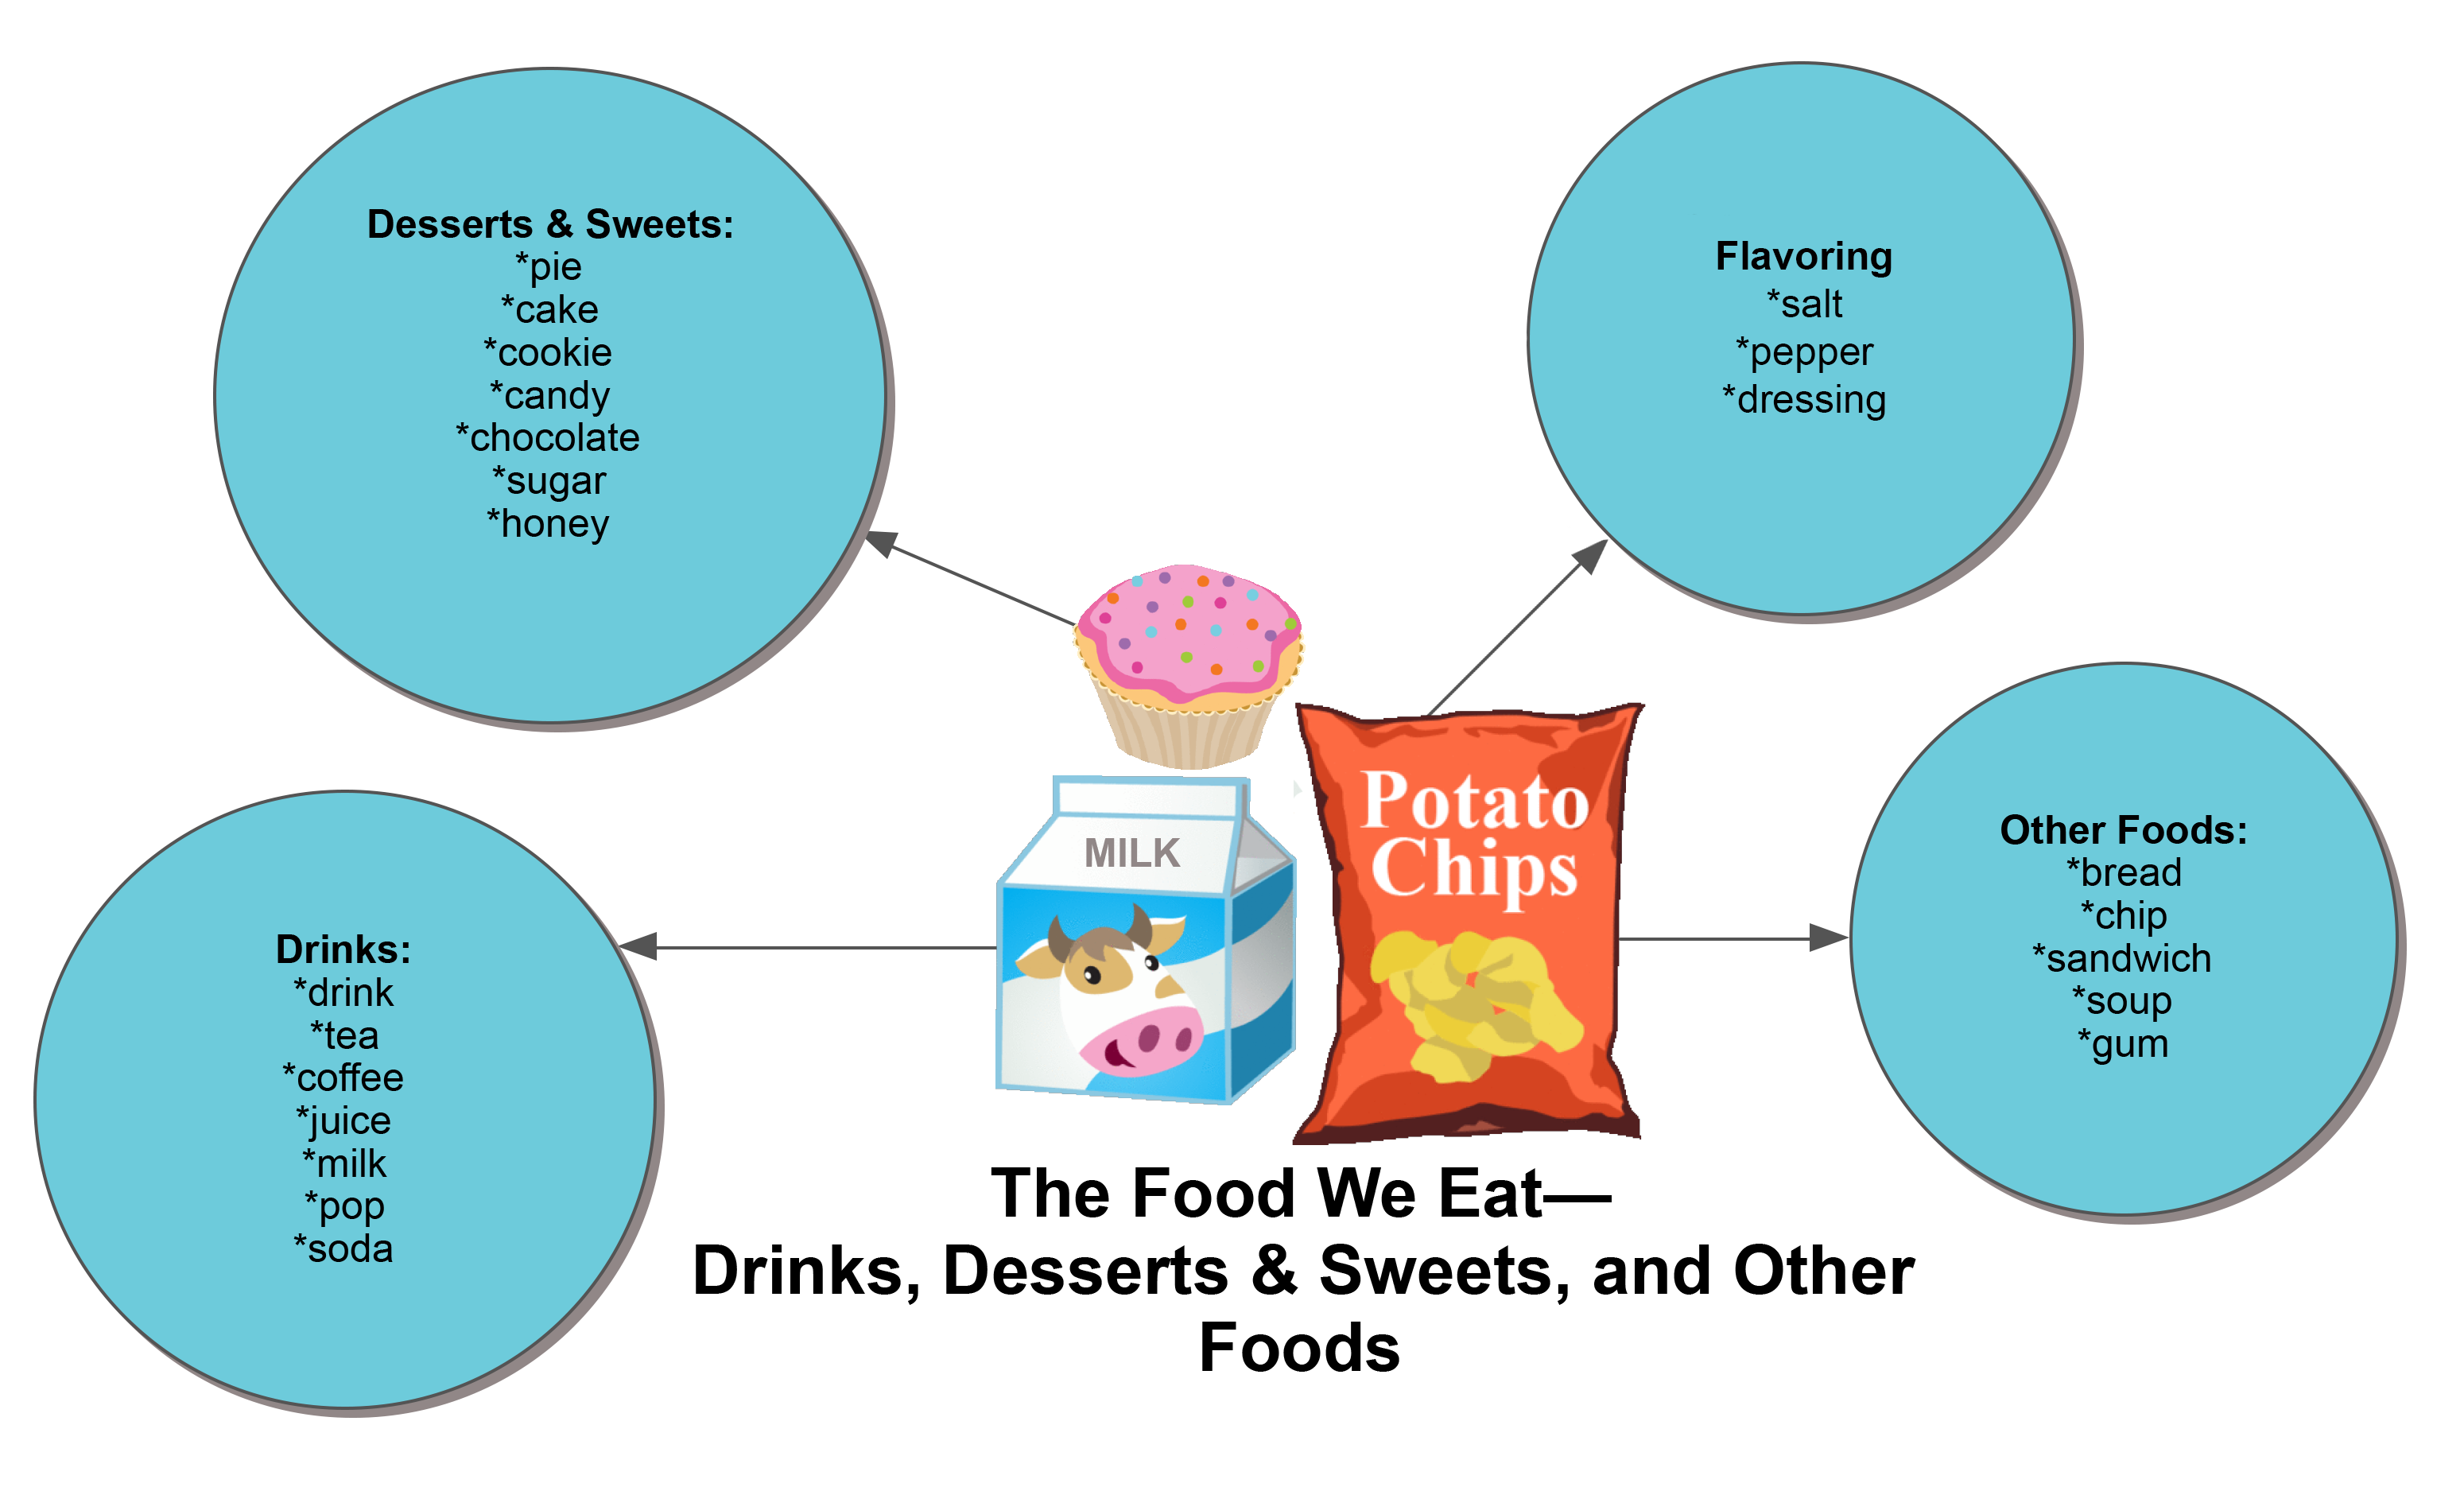 THE-FOOD-WE-EAT-Drinks-Desserts-and-Sweets-and-Other-Foods2.png